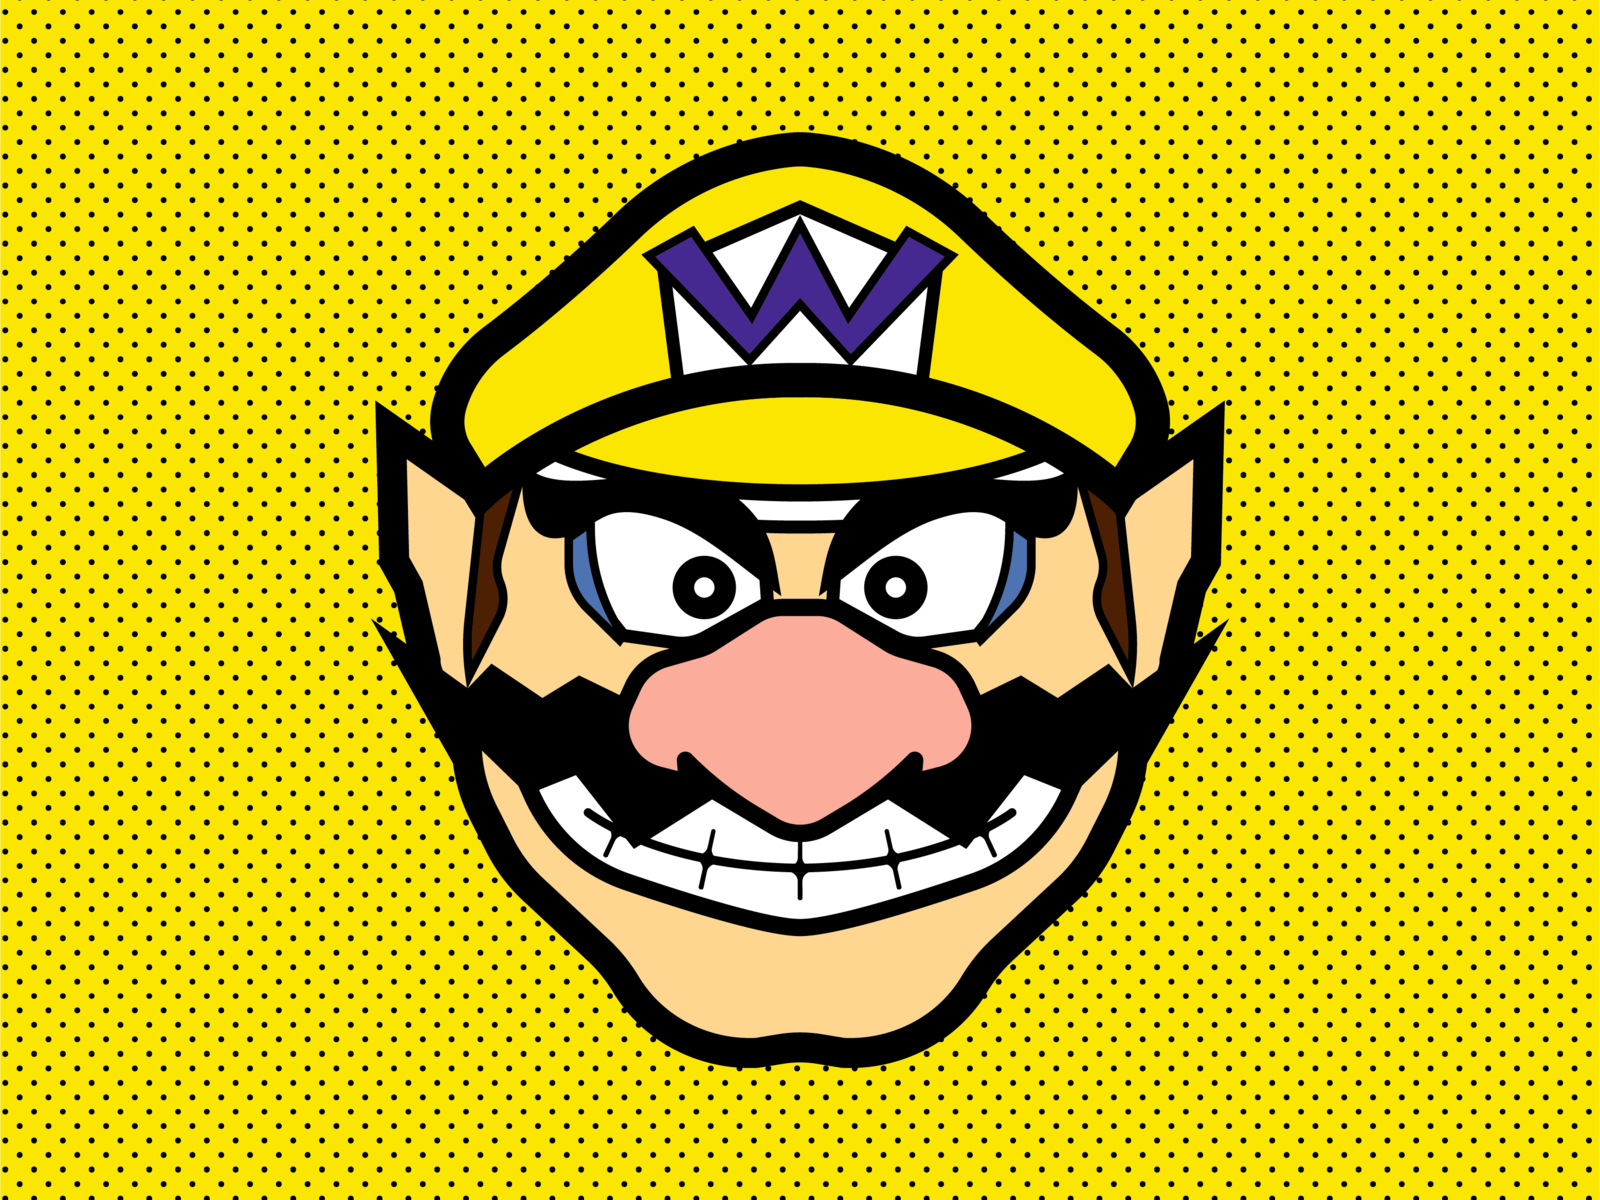 WARIO! by Nick Farr on Dribbble
